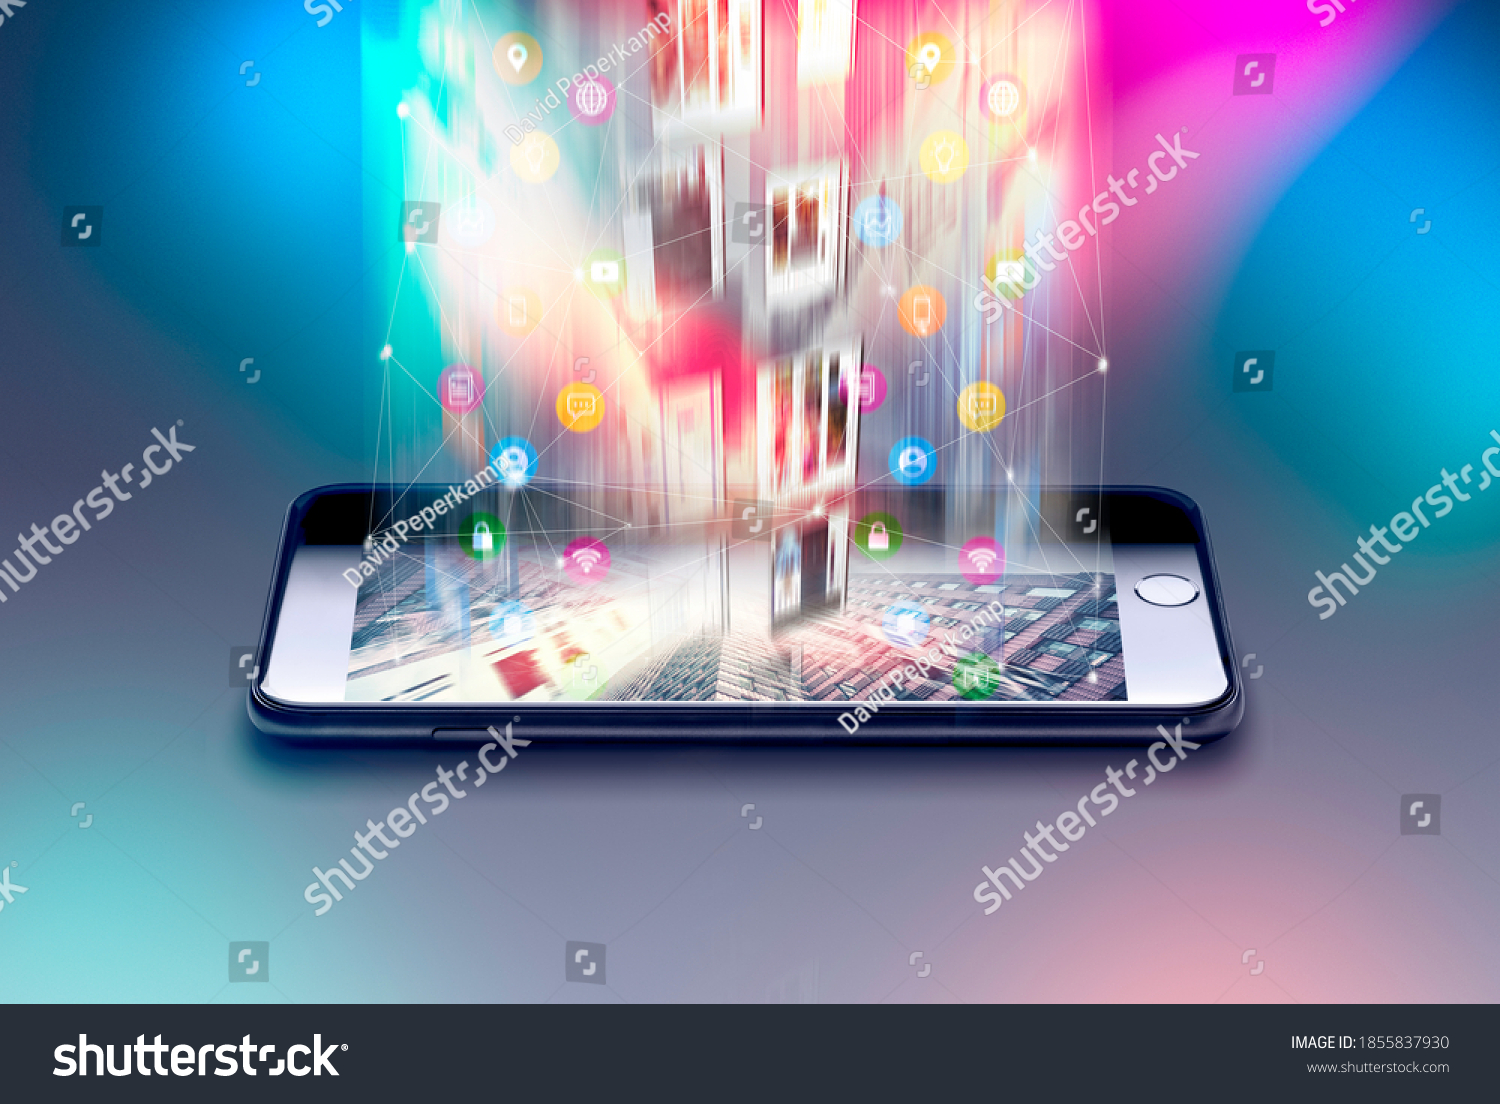 Encrypted mobile data from a smartphone 5G steaming service Creative abstract mobile internet web communication security and safety business commercial concept black glossy touchscreen smart phone app #1855837930